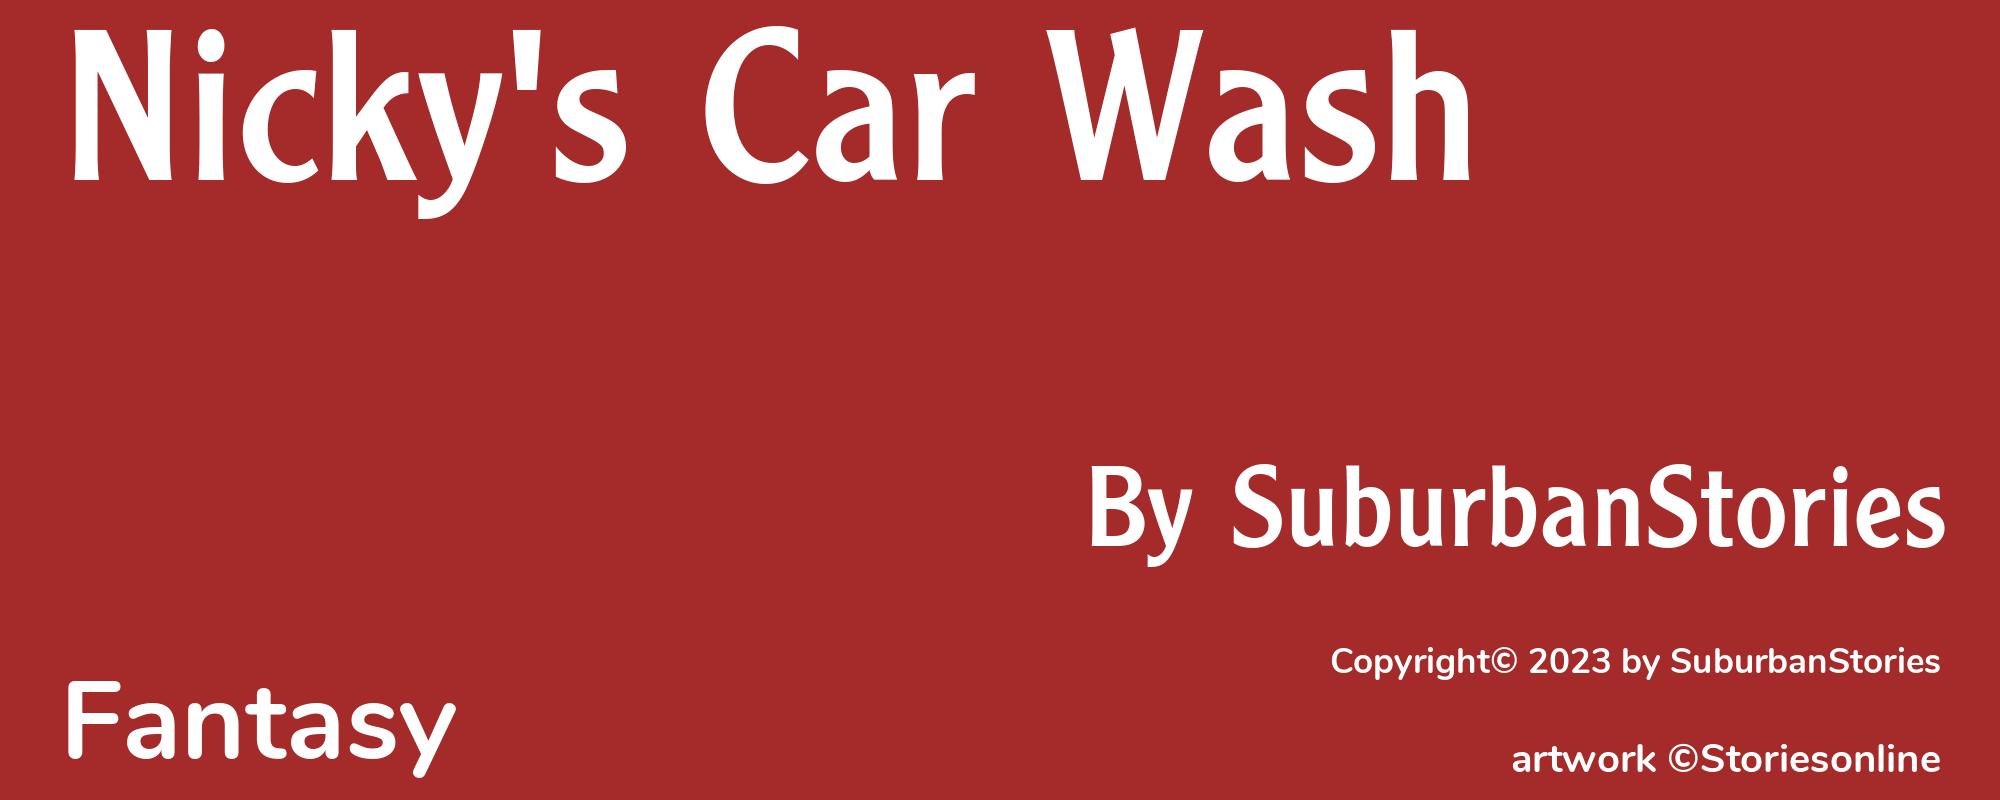 Nicky's Car Wash - Cover